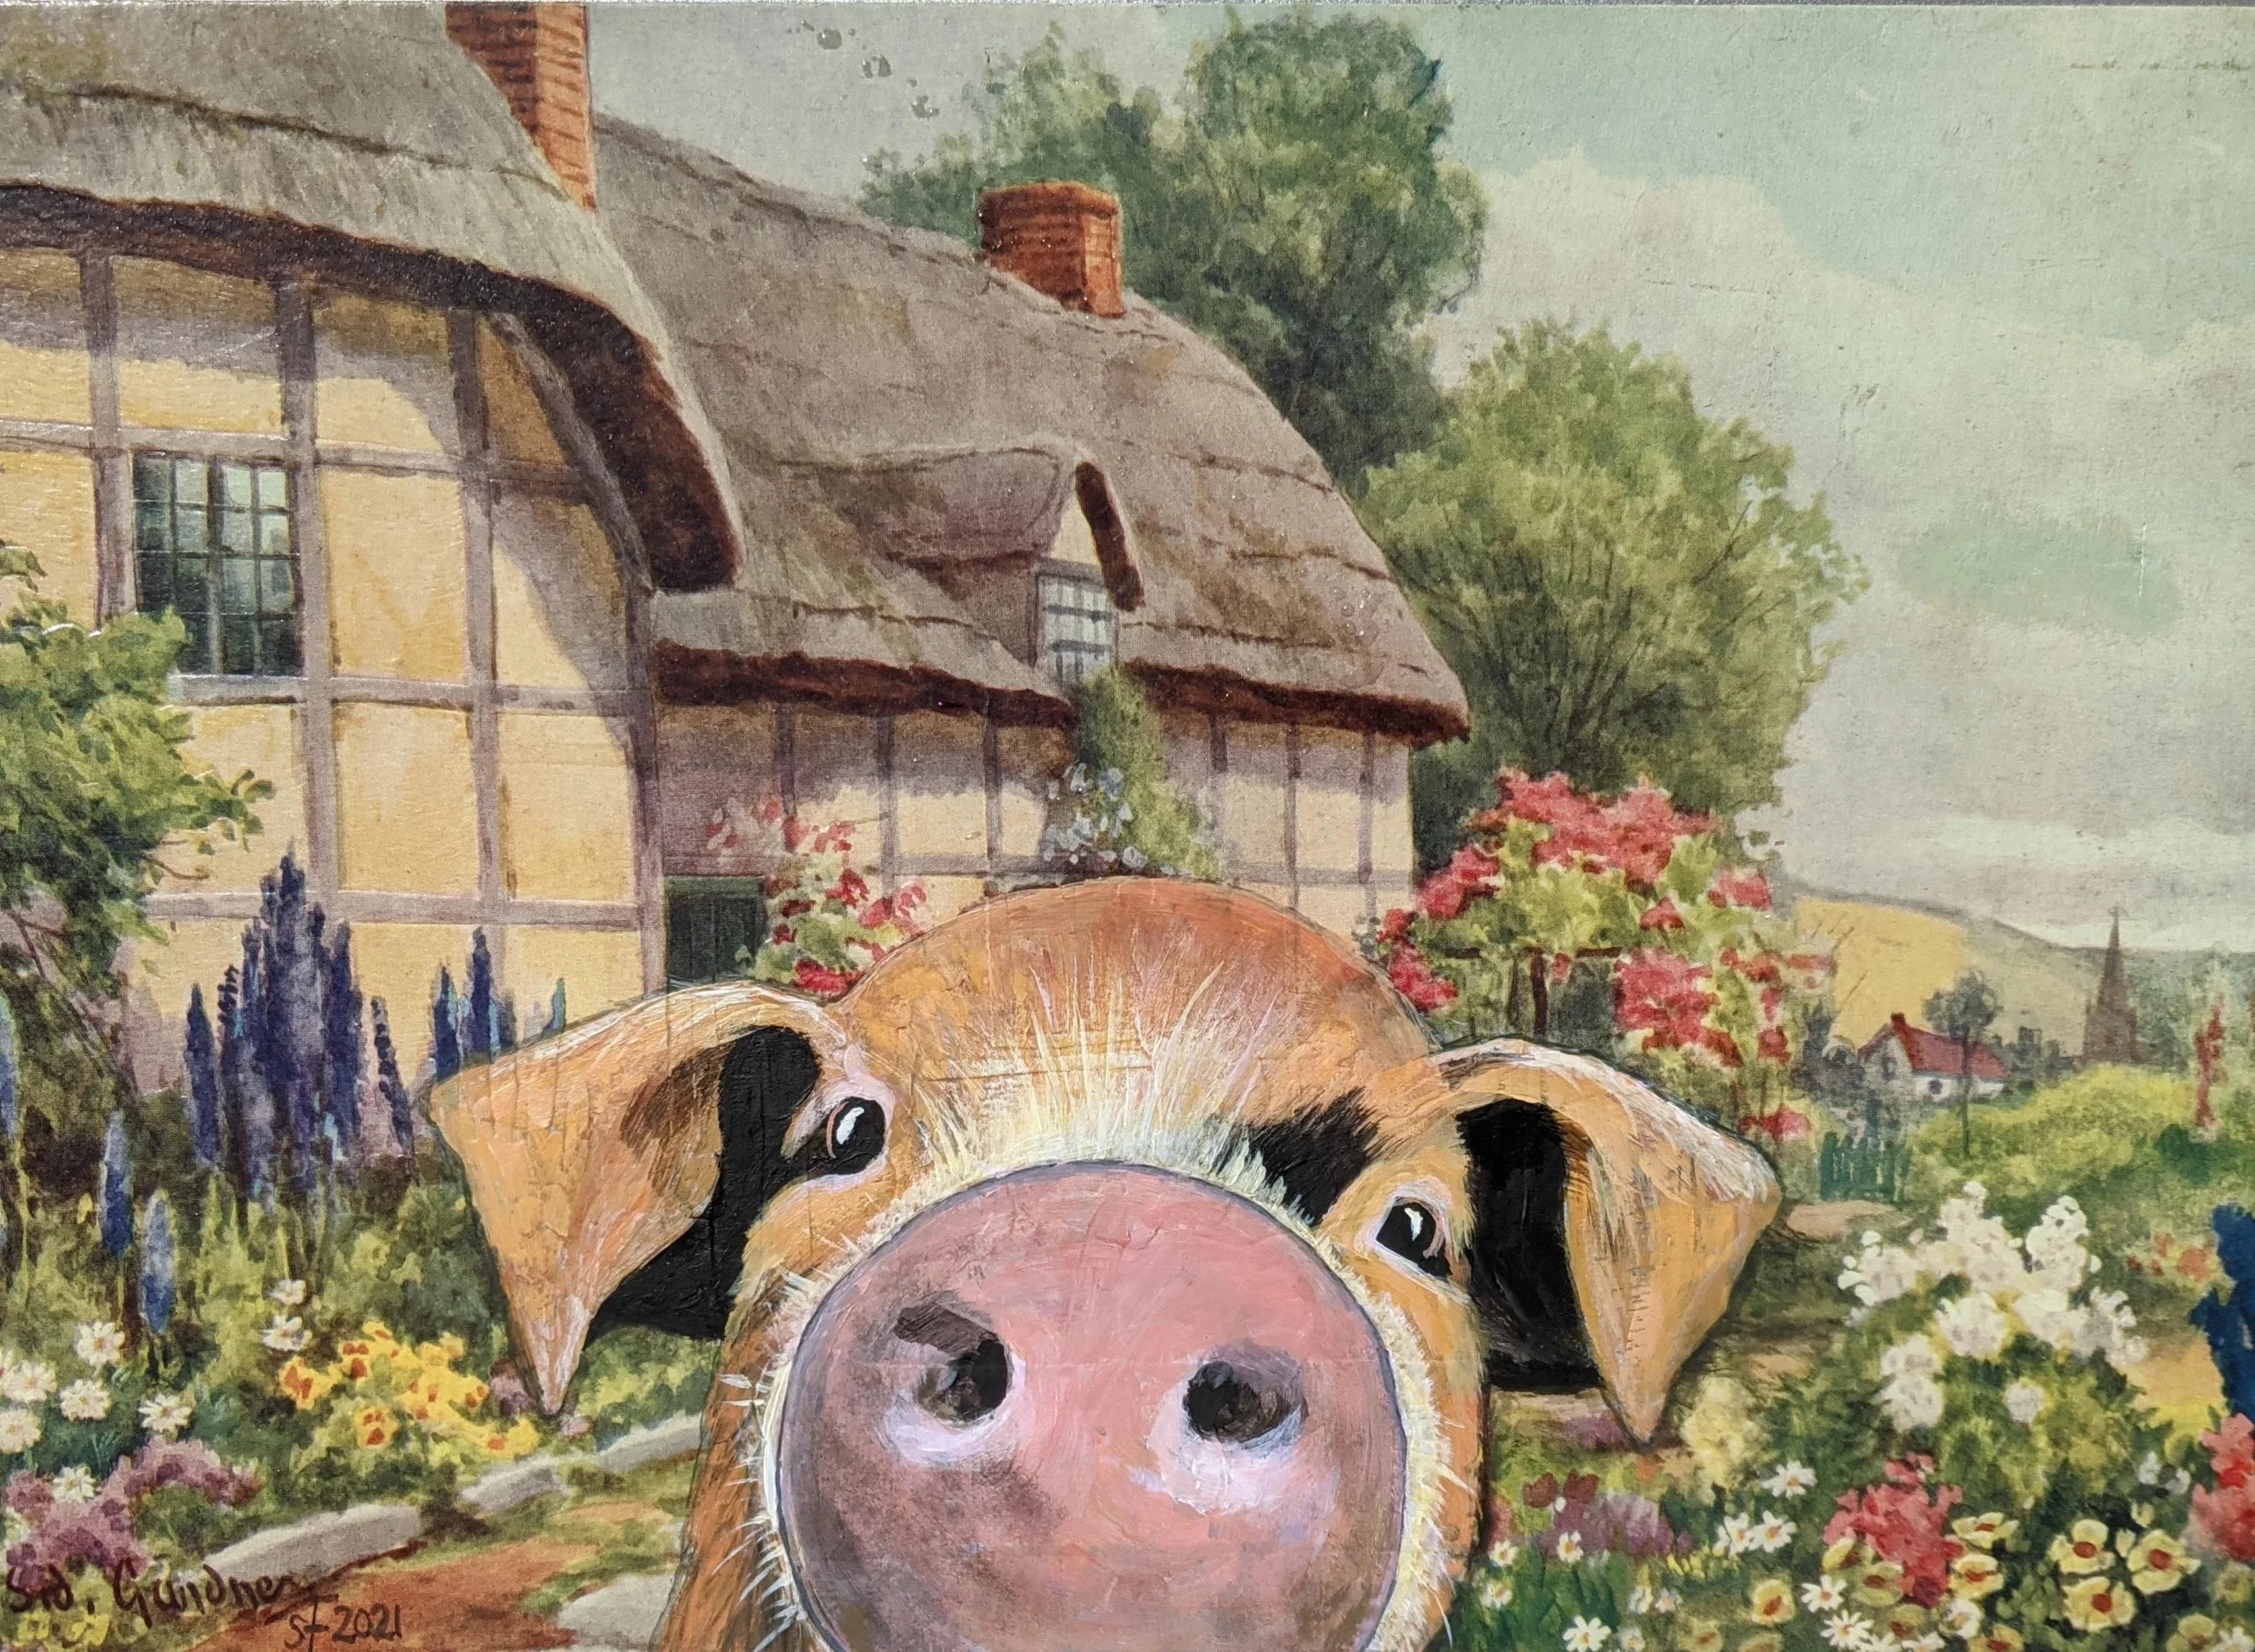 a painting with a quaint home in the background and flowers all around. a pig who is front-and-center has been added. the pig is so closeup that all that is visible is their face.